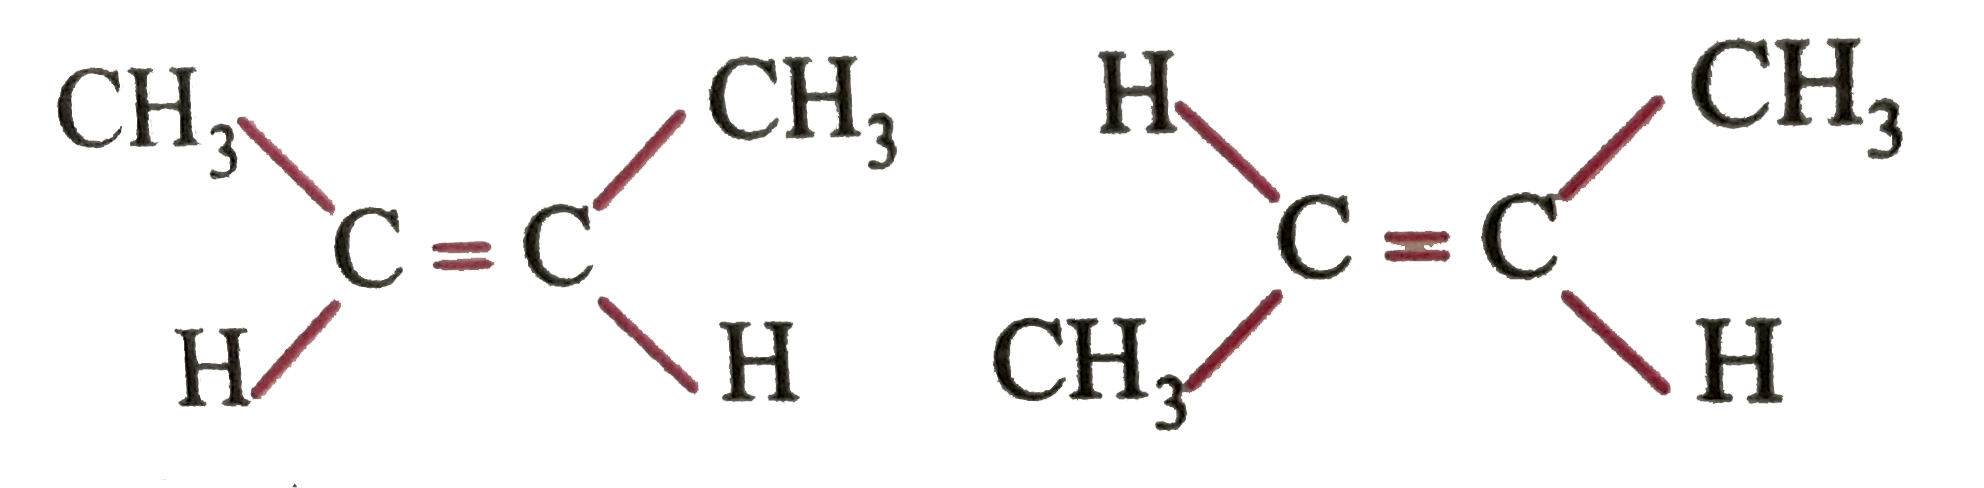 You are given two compound      First, you name both of them the same yet, are they really same structure, or they some how different ?Carefully inspection should convince you that they are indeed different. Now, how their physical and chemical properties differ? Generally   (i) cis-isomer has more diplomoment than trans-isomer   (ii) cis-is less stable than trans   (iii) boiling points of cis isomers are than those of trans isomers (remember boiling points are directly related to polarity which is determined by dipolemoment) chemical reactivities of cis and trans also differ from each other.   Arrange the following compounds in the increasing order of the boiling poiints   CH(3)-underset(A)CH=CH-CH(3)(cis),CH(3)-underset(B)CH=CH-CH(3)(trans)   CH(3)-underset(C)CHCl=CH(cis),CH(3)-underset(D)CH=CHCl(trans)